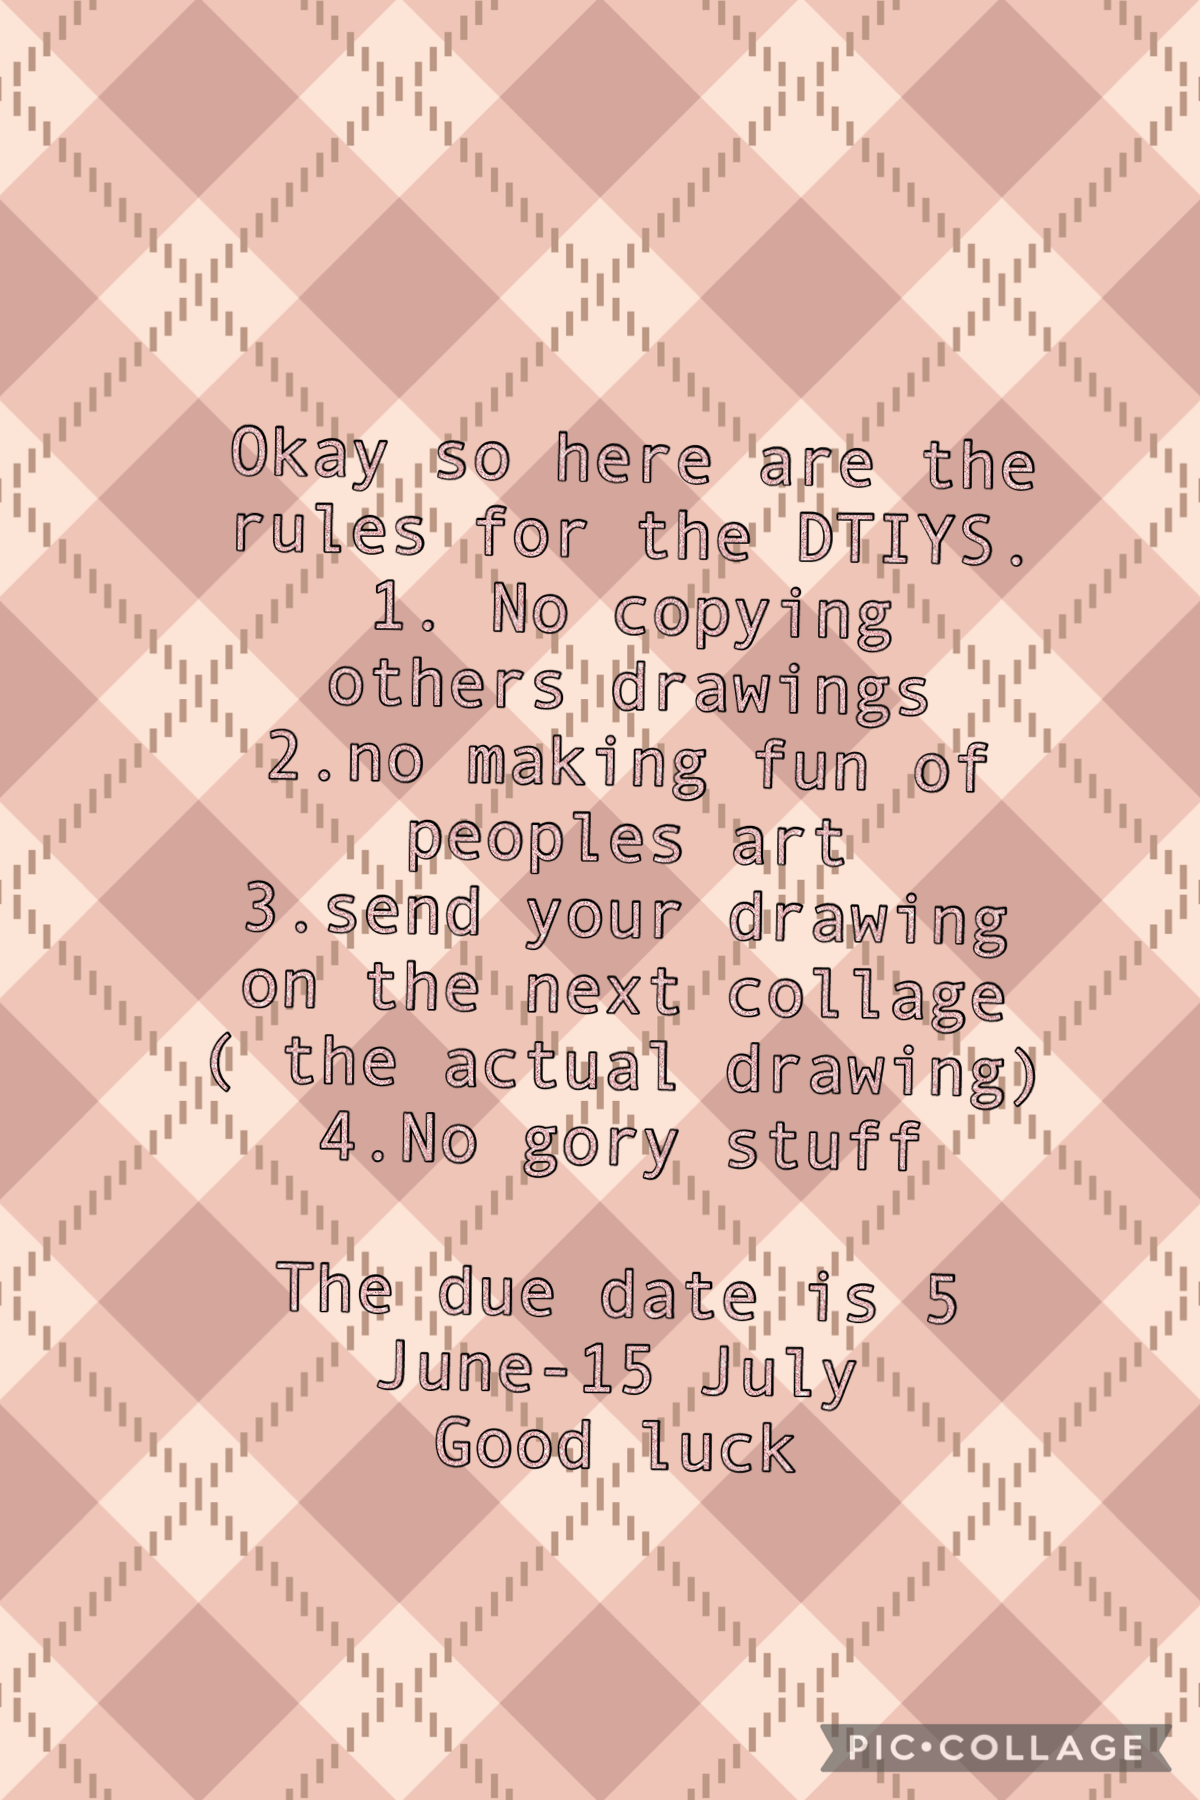 Rules and due date for DTIYS 